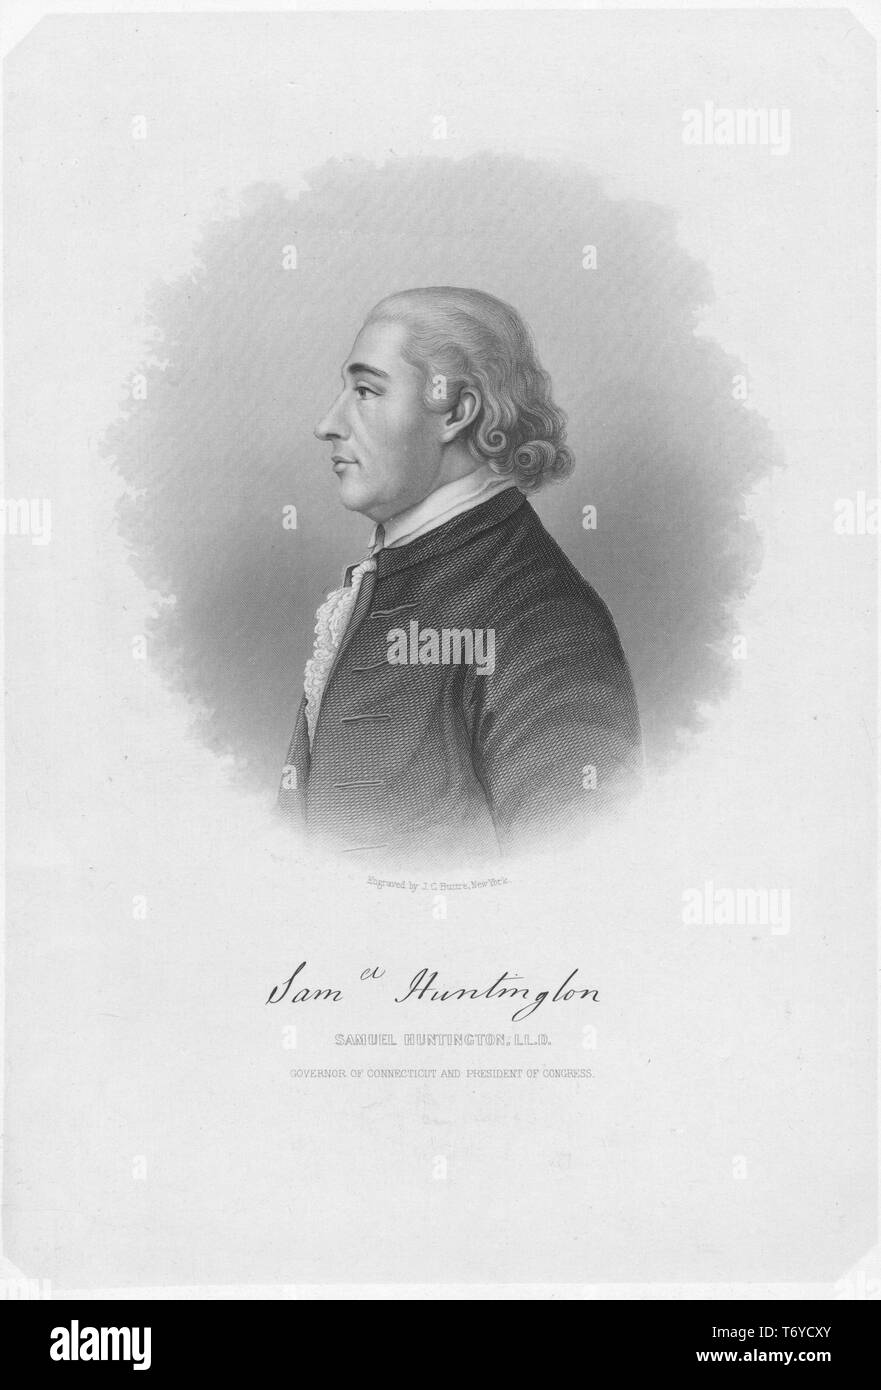 Engraved portrait of Samuel Huntington, signer of the Declaration of Independence and the Articles of Confederation, also served as President of the Continental Congress, an American jurist and statesman from Windham, Connecticut, 1845. From the New York Public Library. () Stock Photo